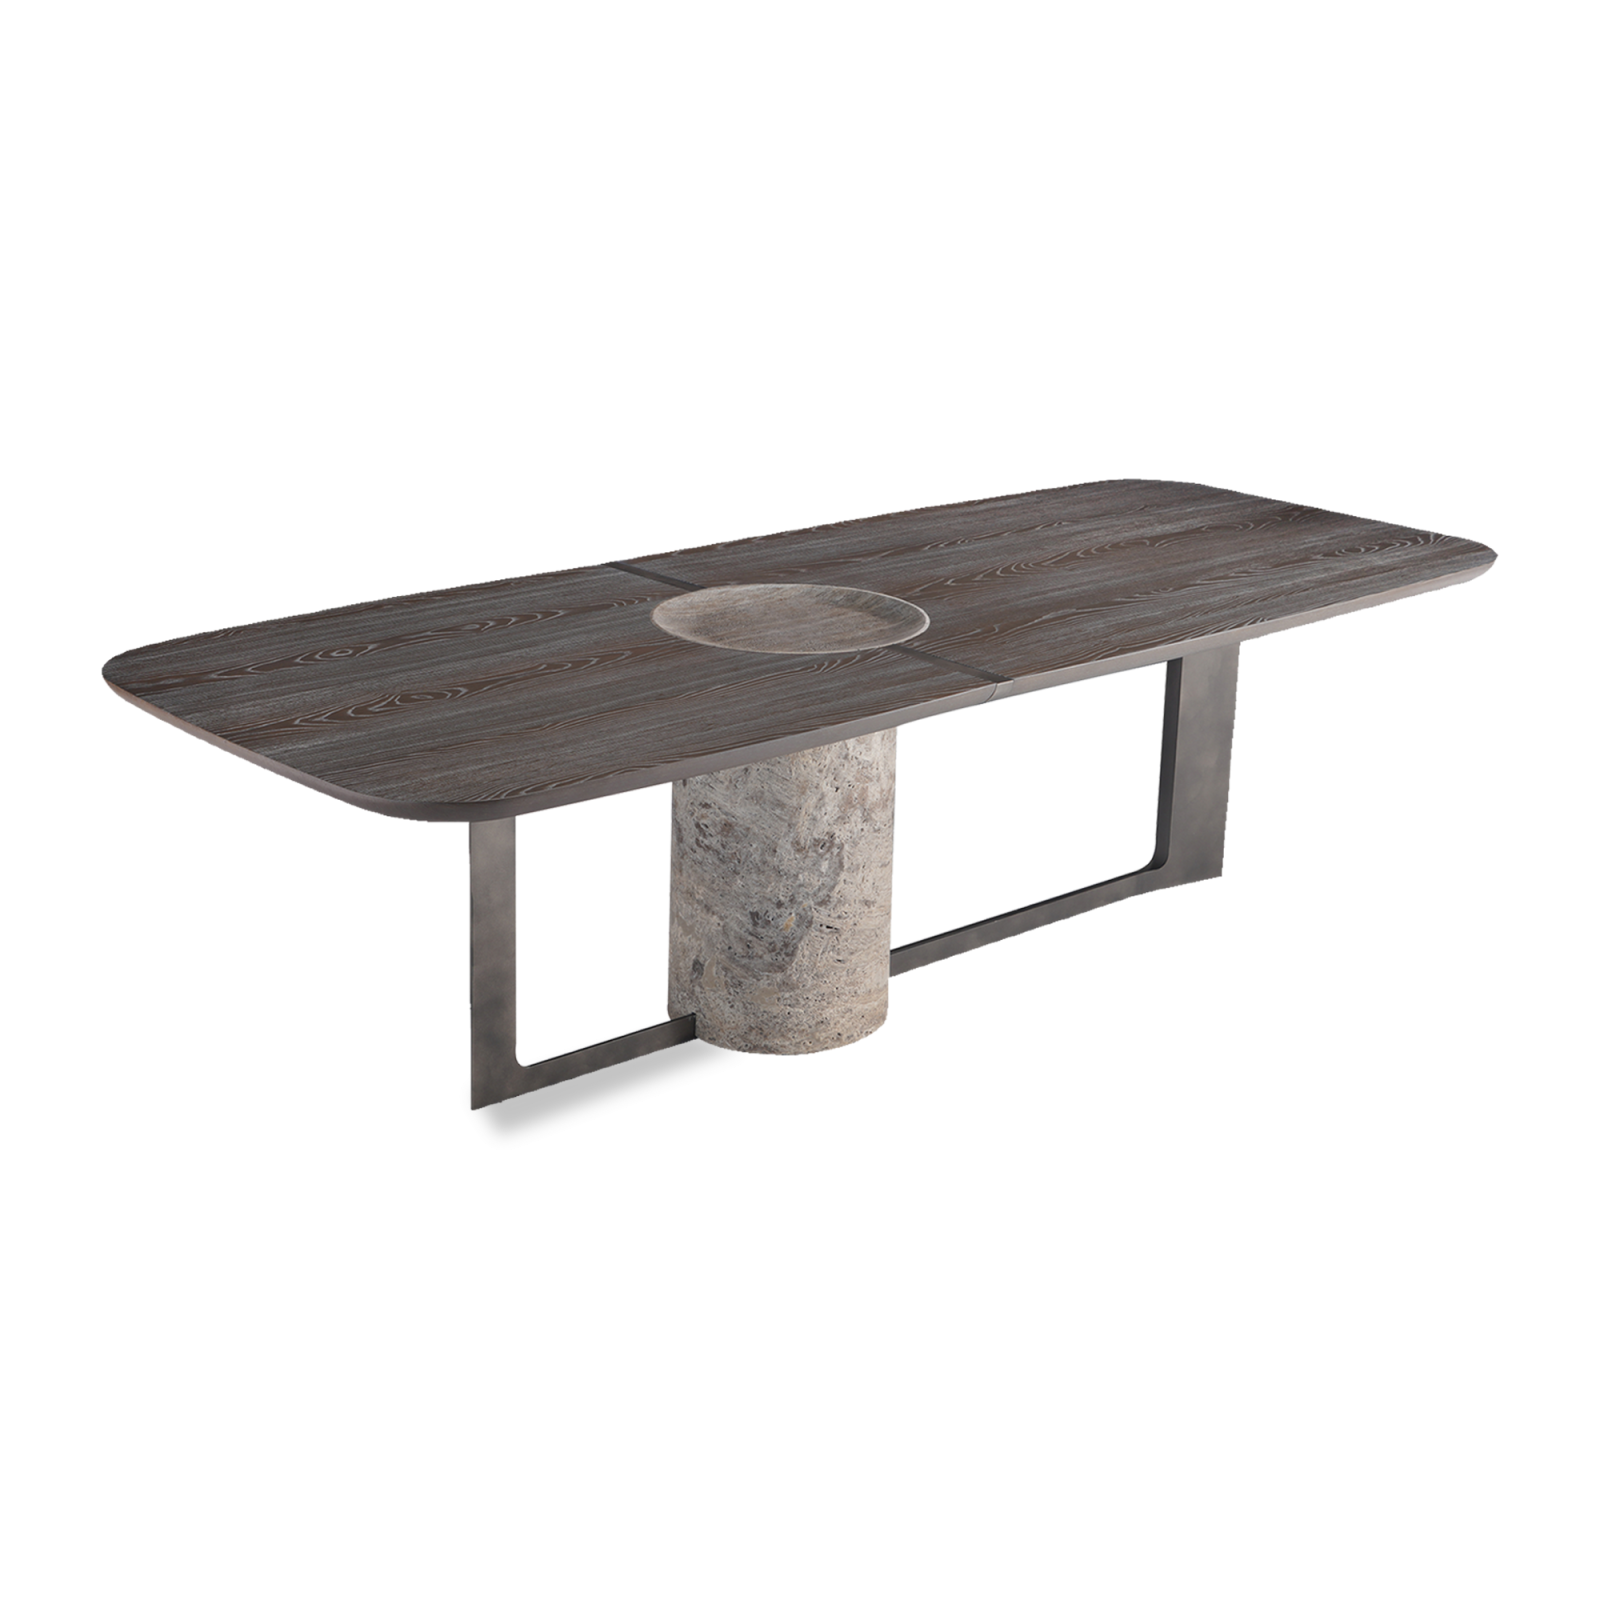 Titano Table, whose marble texture is enriched with wooden motifs and consists of metal legs, is on a white background.